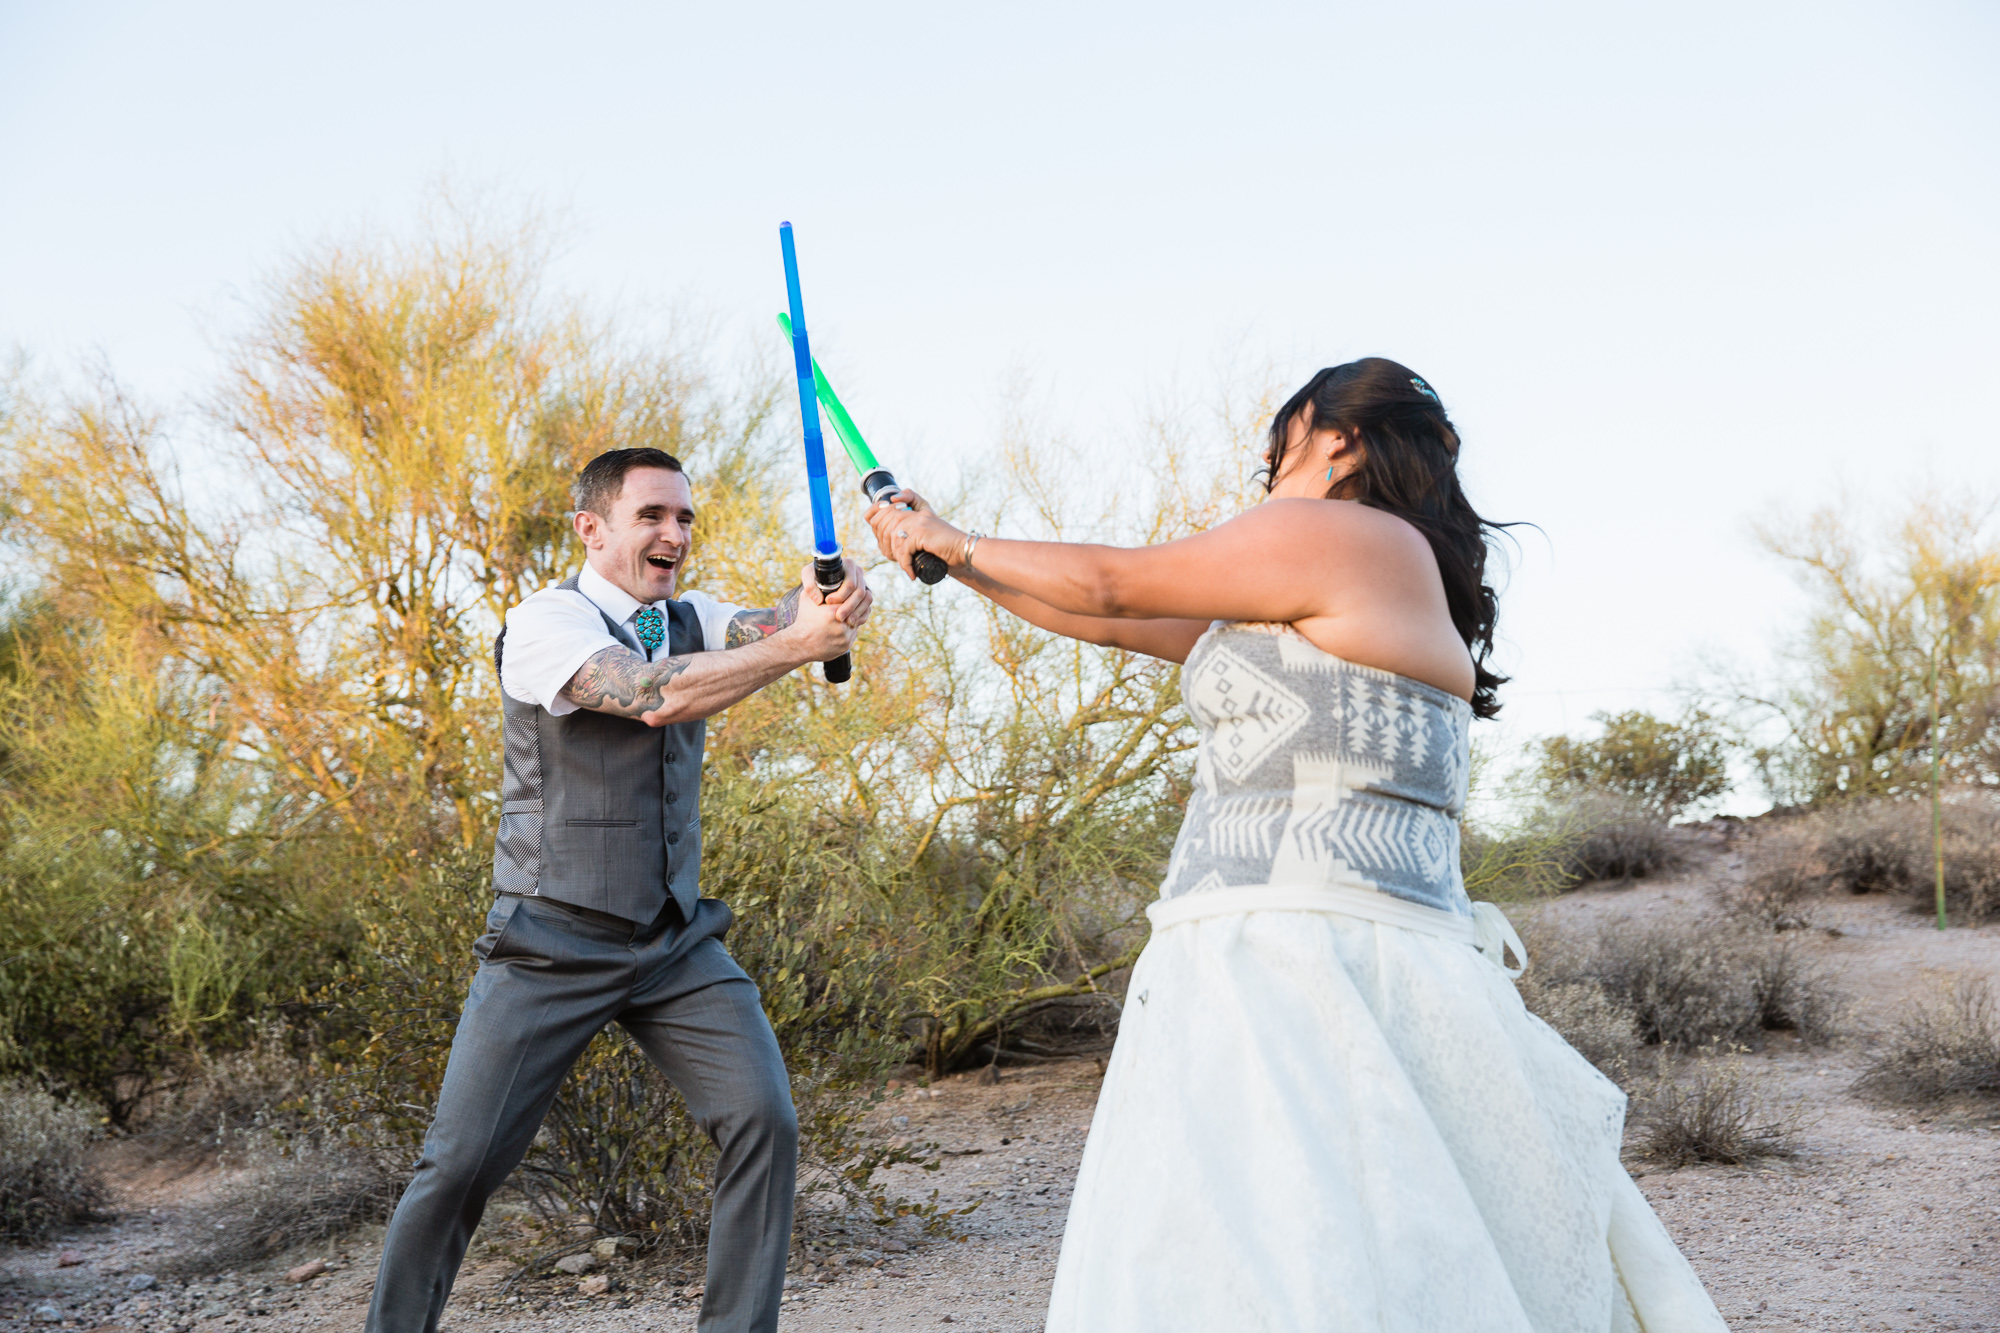 Bride and groom in a light saber duel to start their first dance at their Lost Dutchman State Park wedding reception by Arizona wedding photographer PMA Photography.